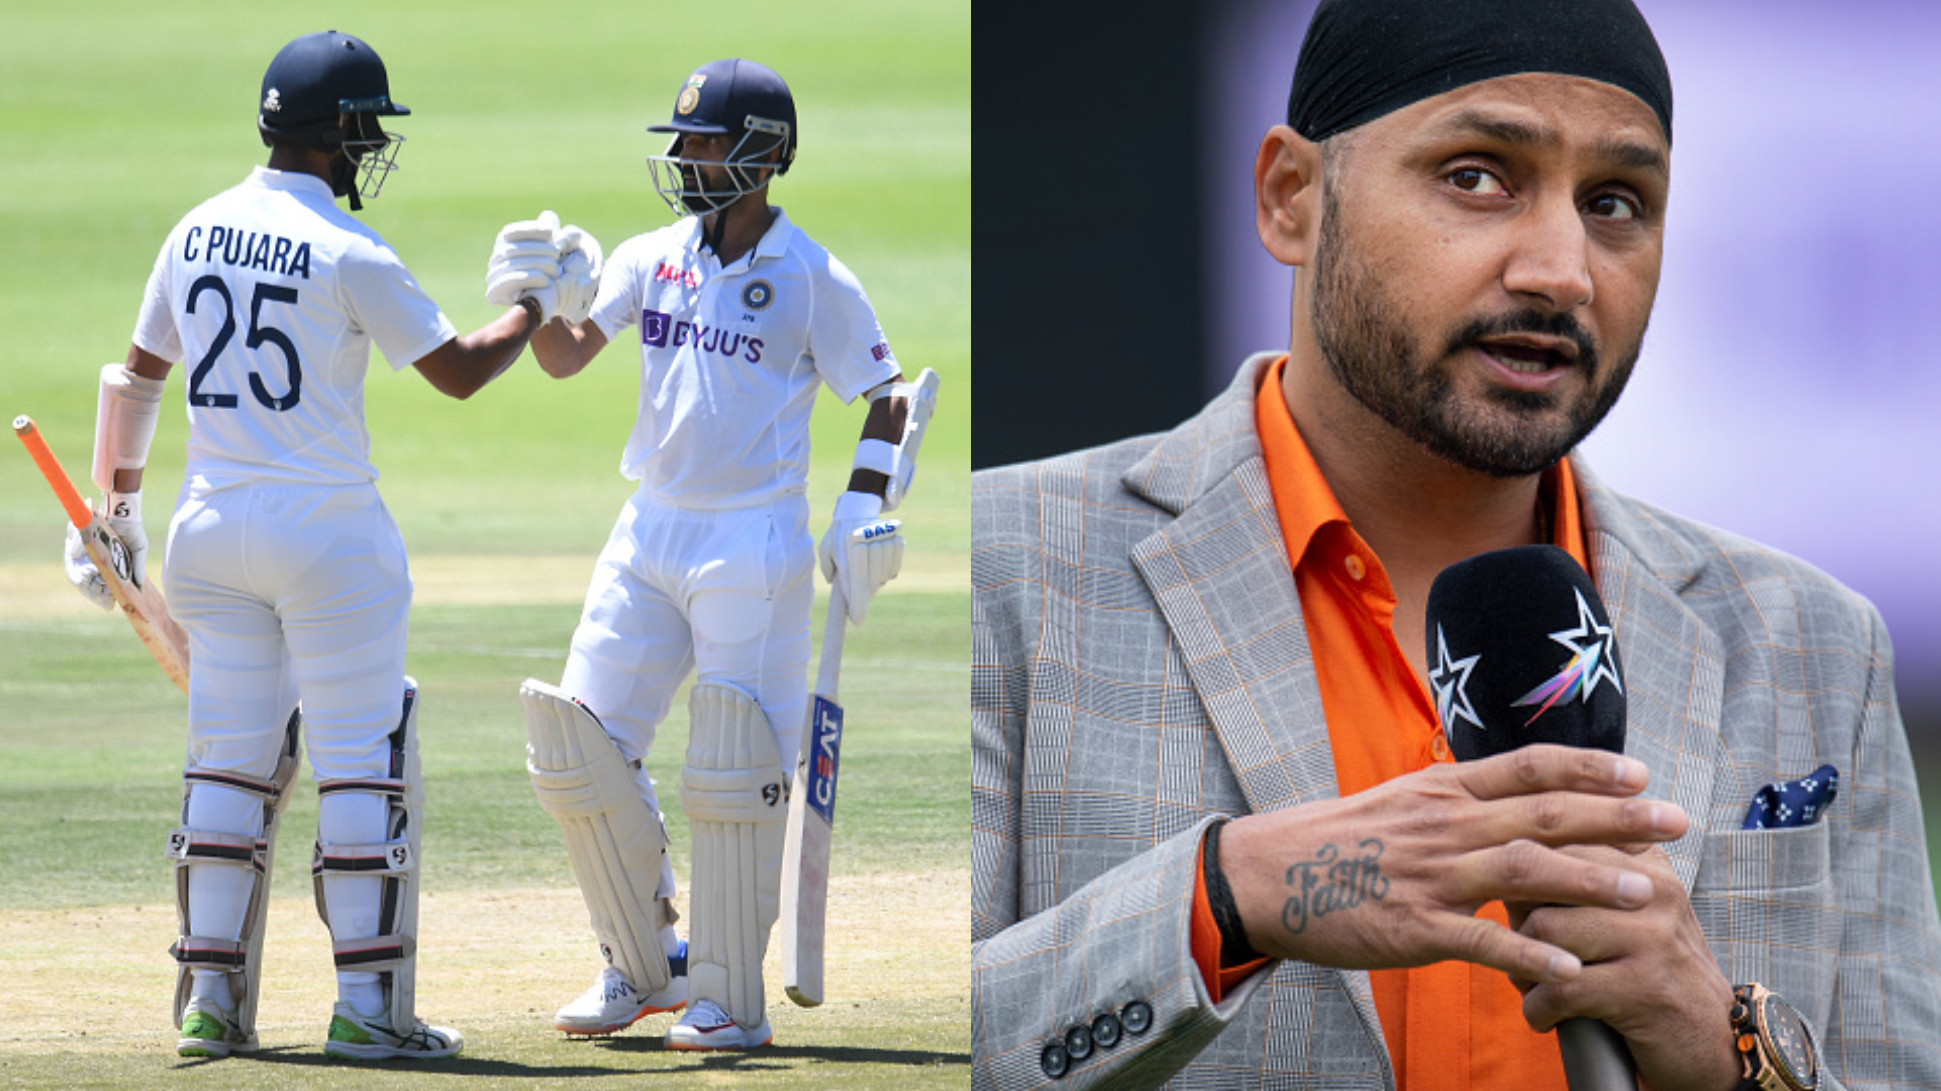 “Sign some new player might come”: Harbhajan highlights another concern for India amidst Rahane-Pujara debate